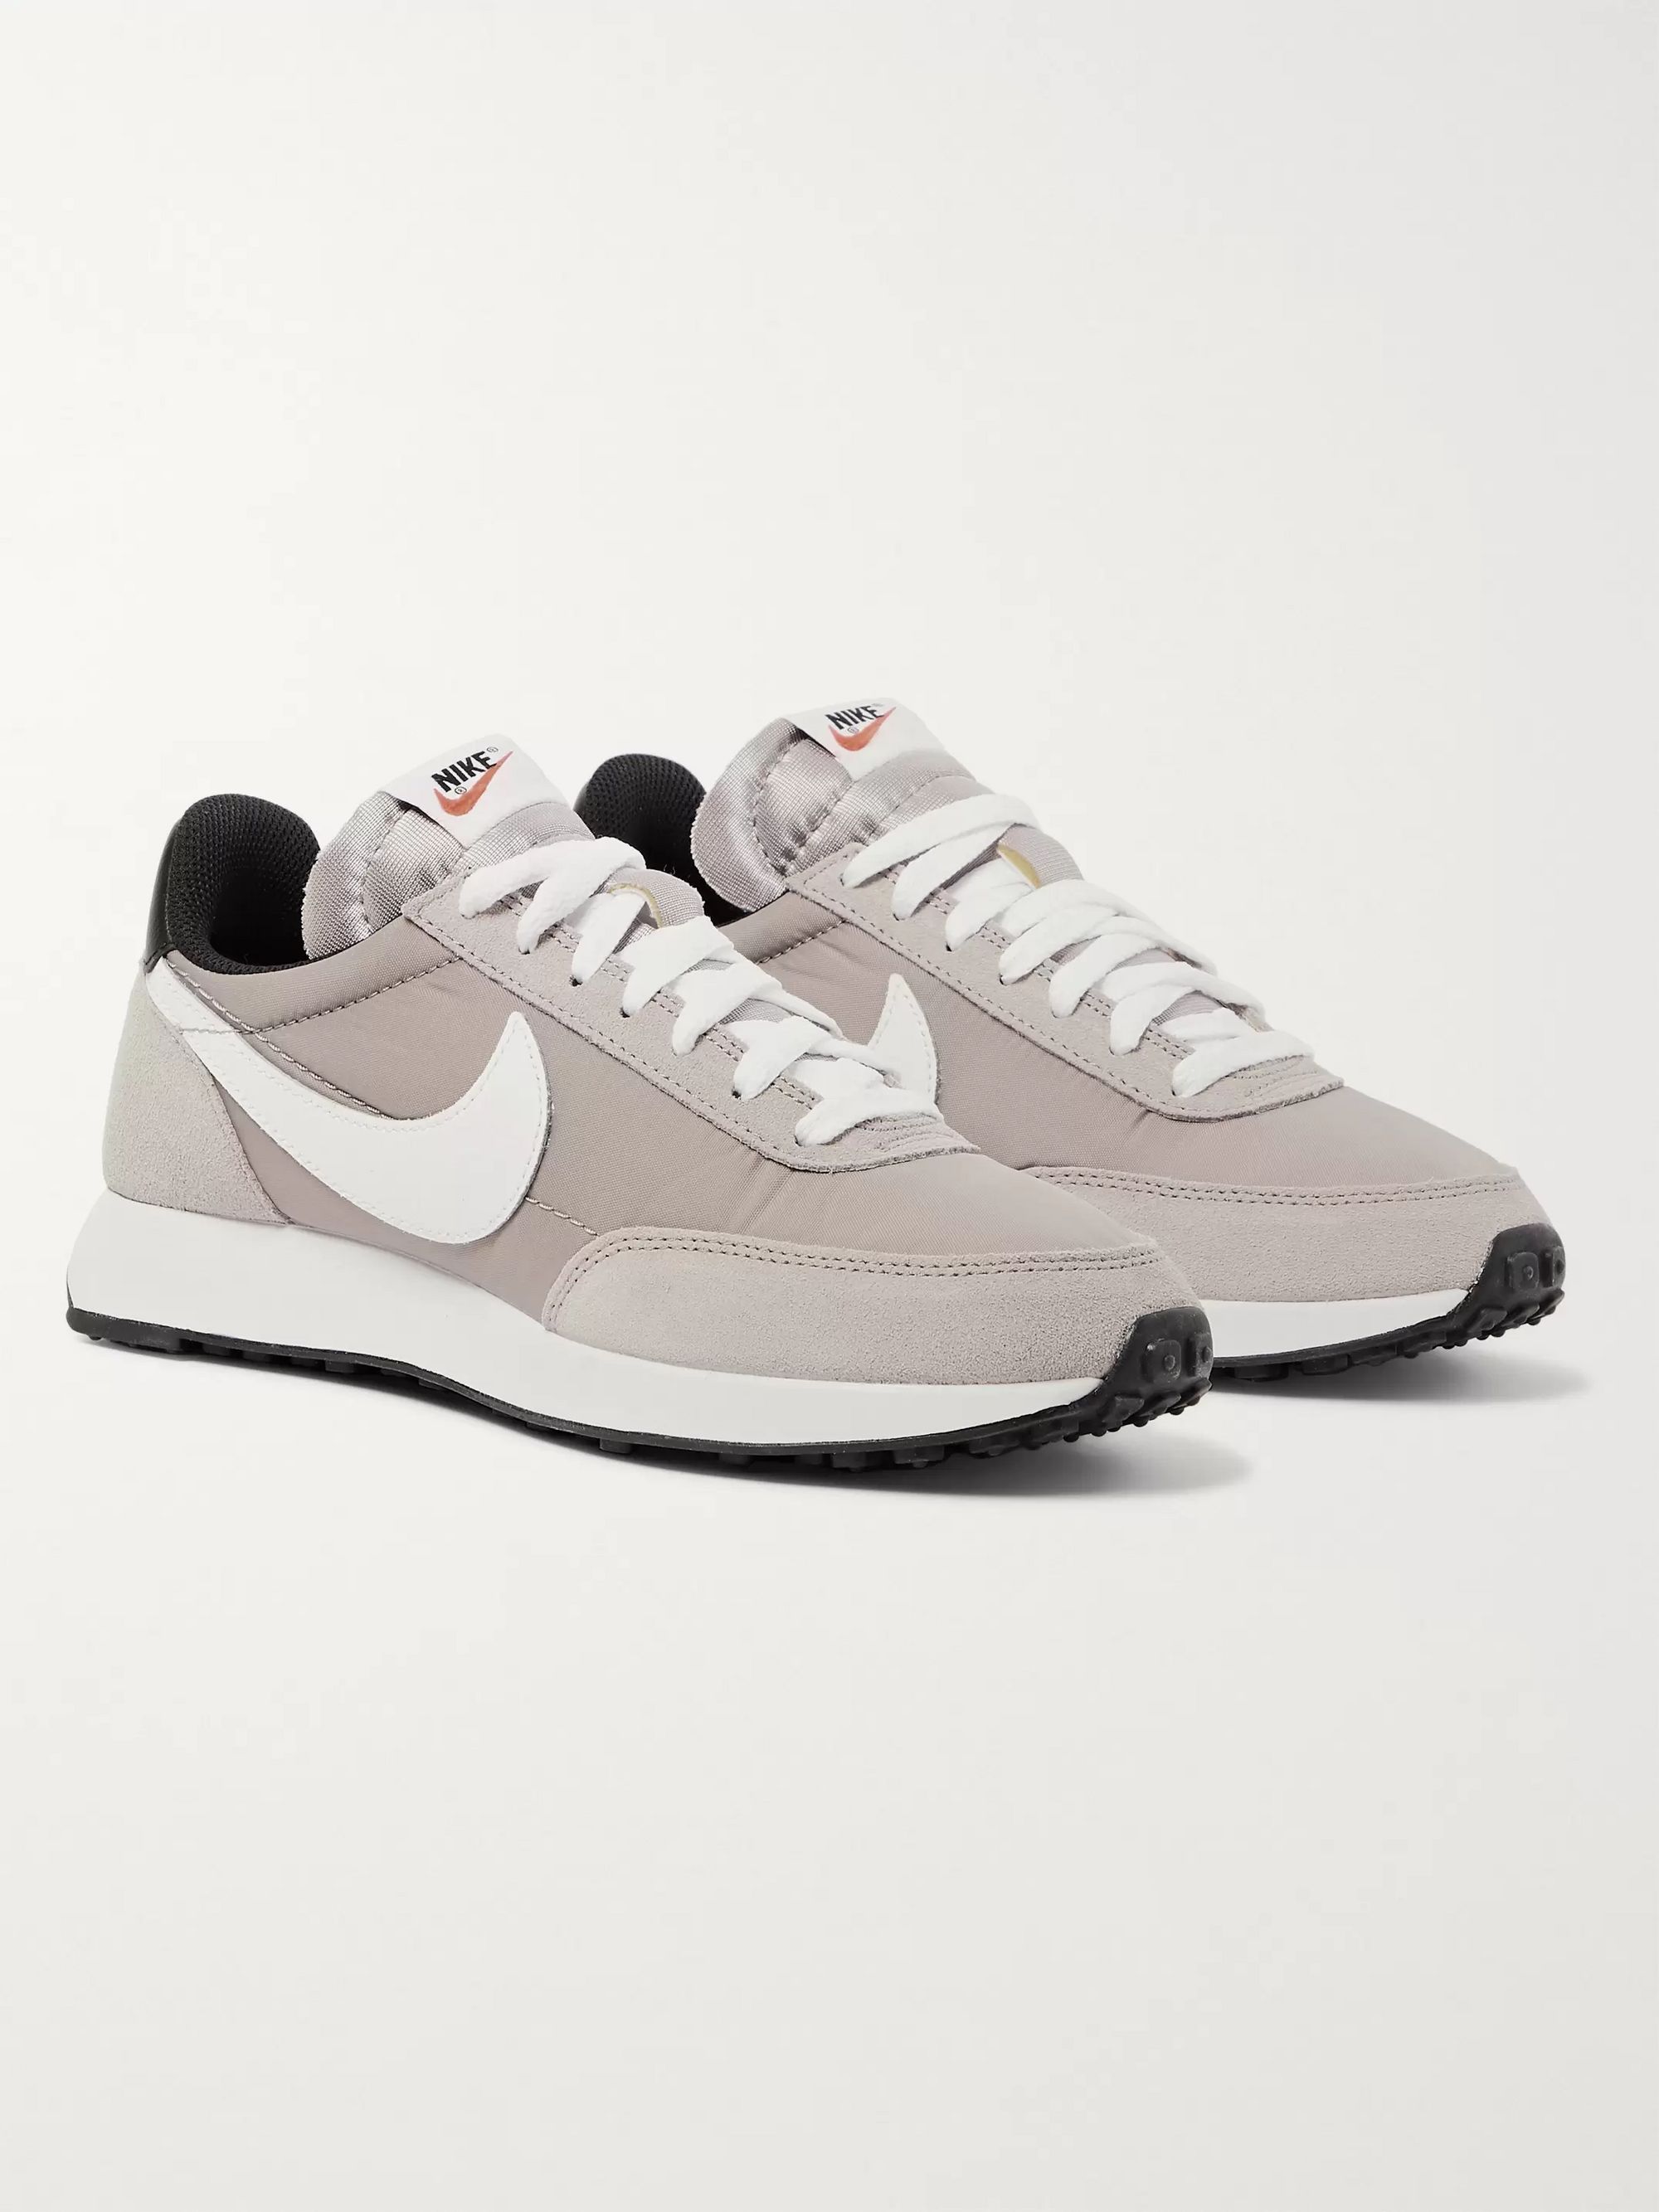 Gray Air Tailwind 79 Shell, Suede and 